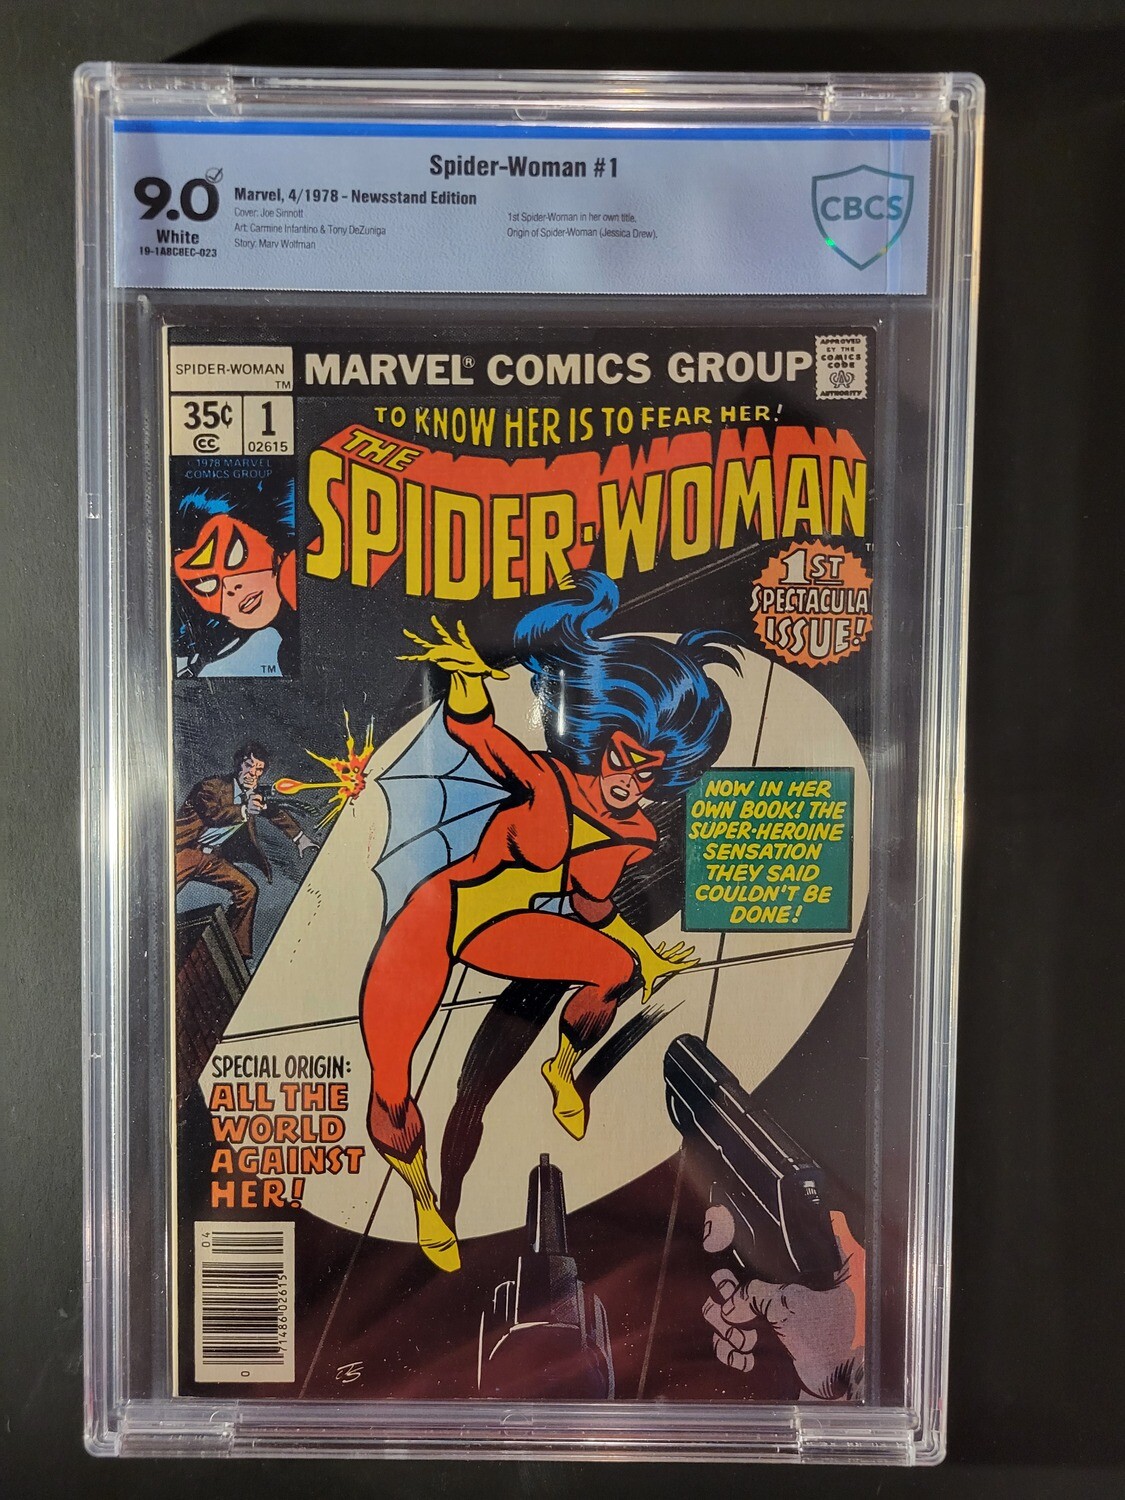 Spider-Woman #1 CBCS 9.0 1st Spider-Woman in her own title